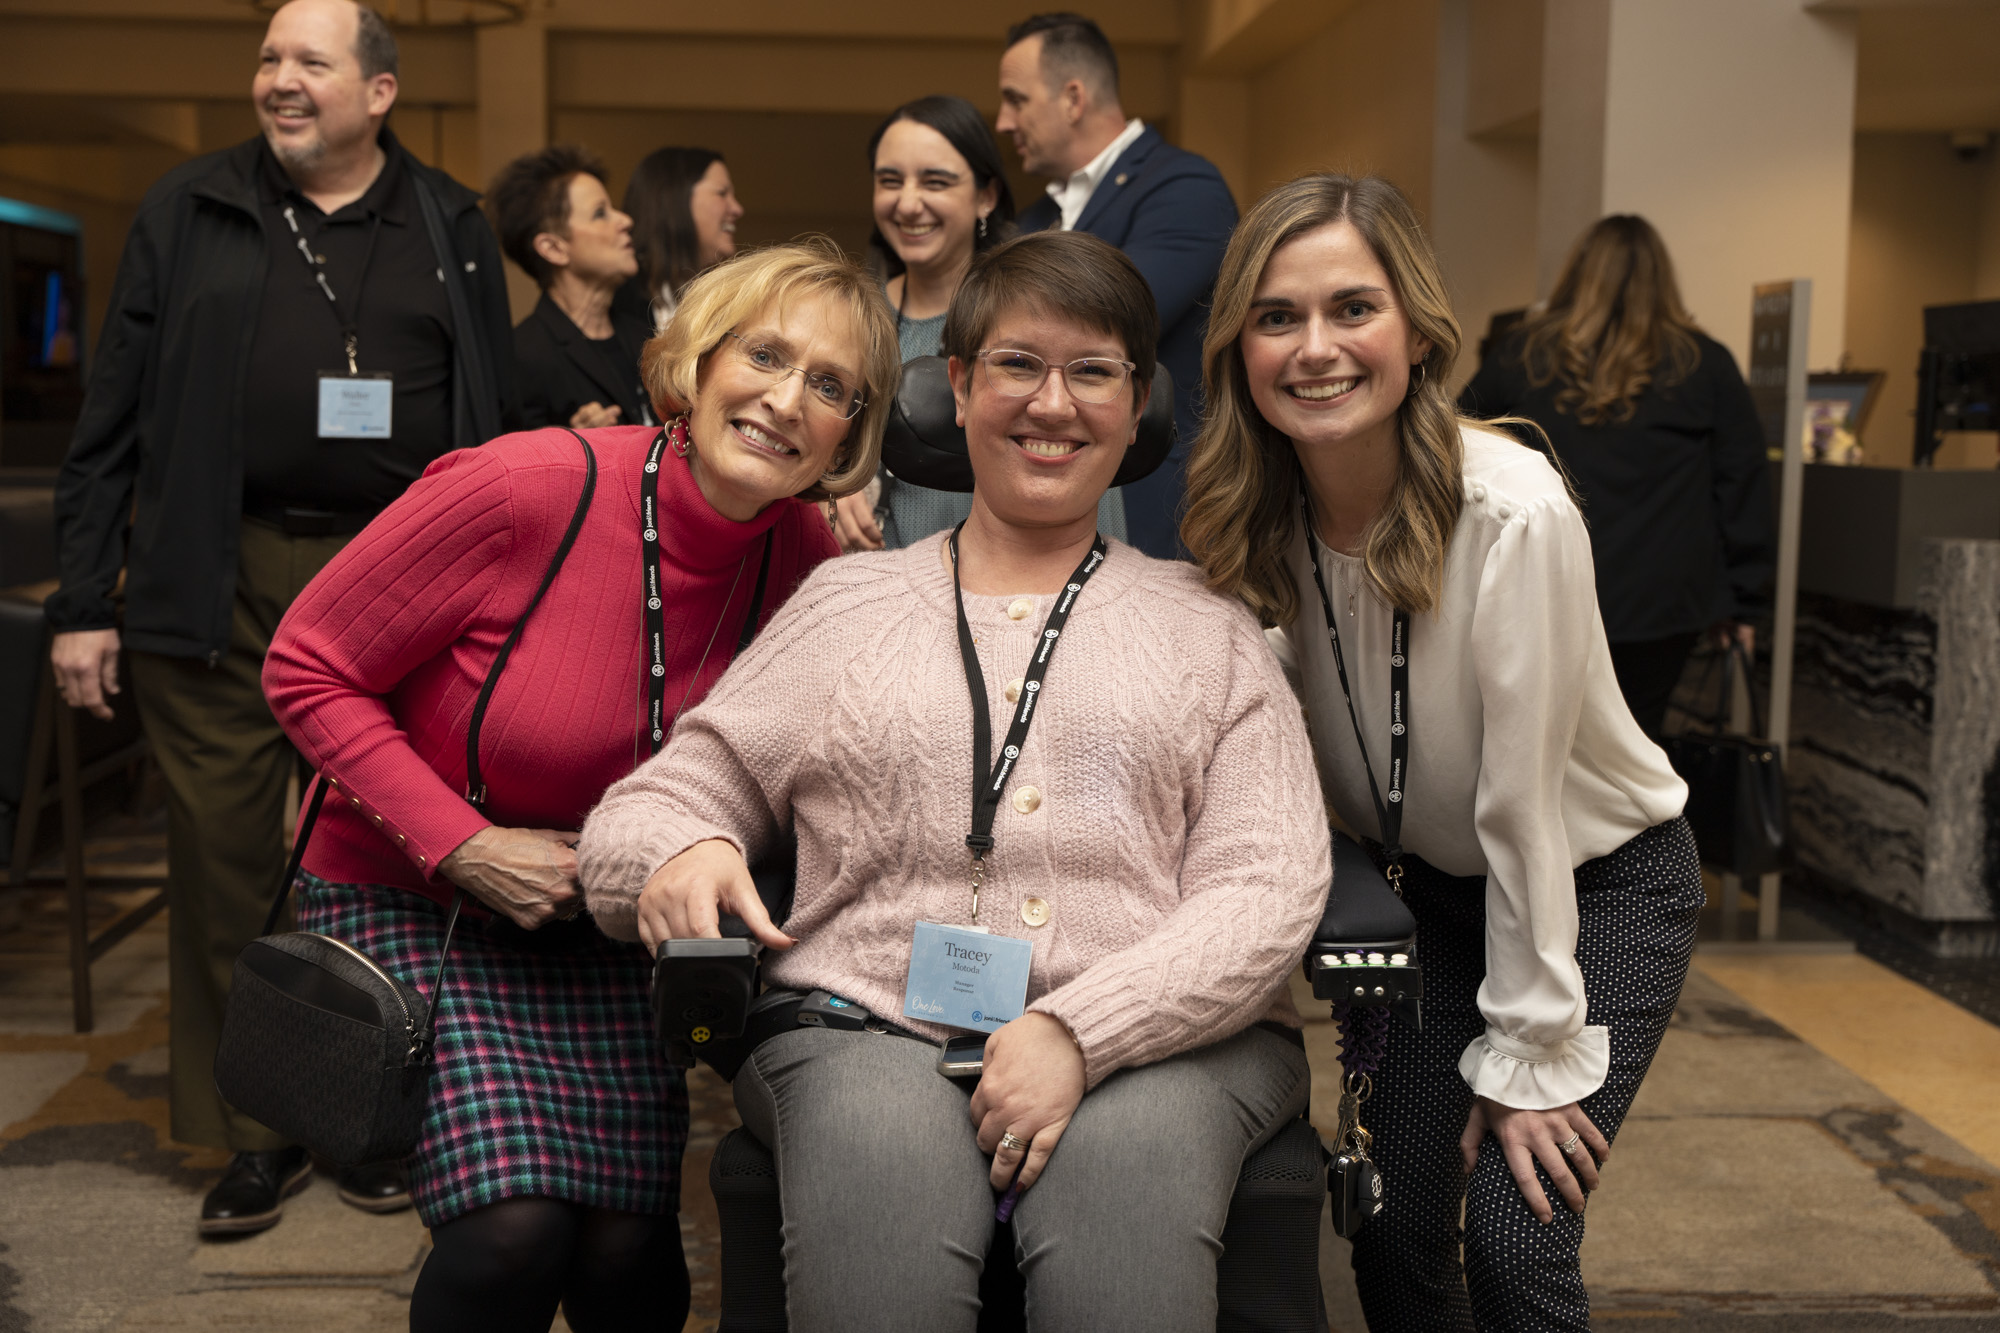 A picture of a woman seated in her wheelchair with to other woman crouching beside her and smiling.